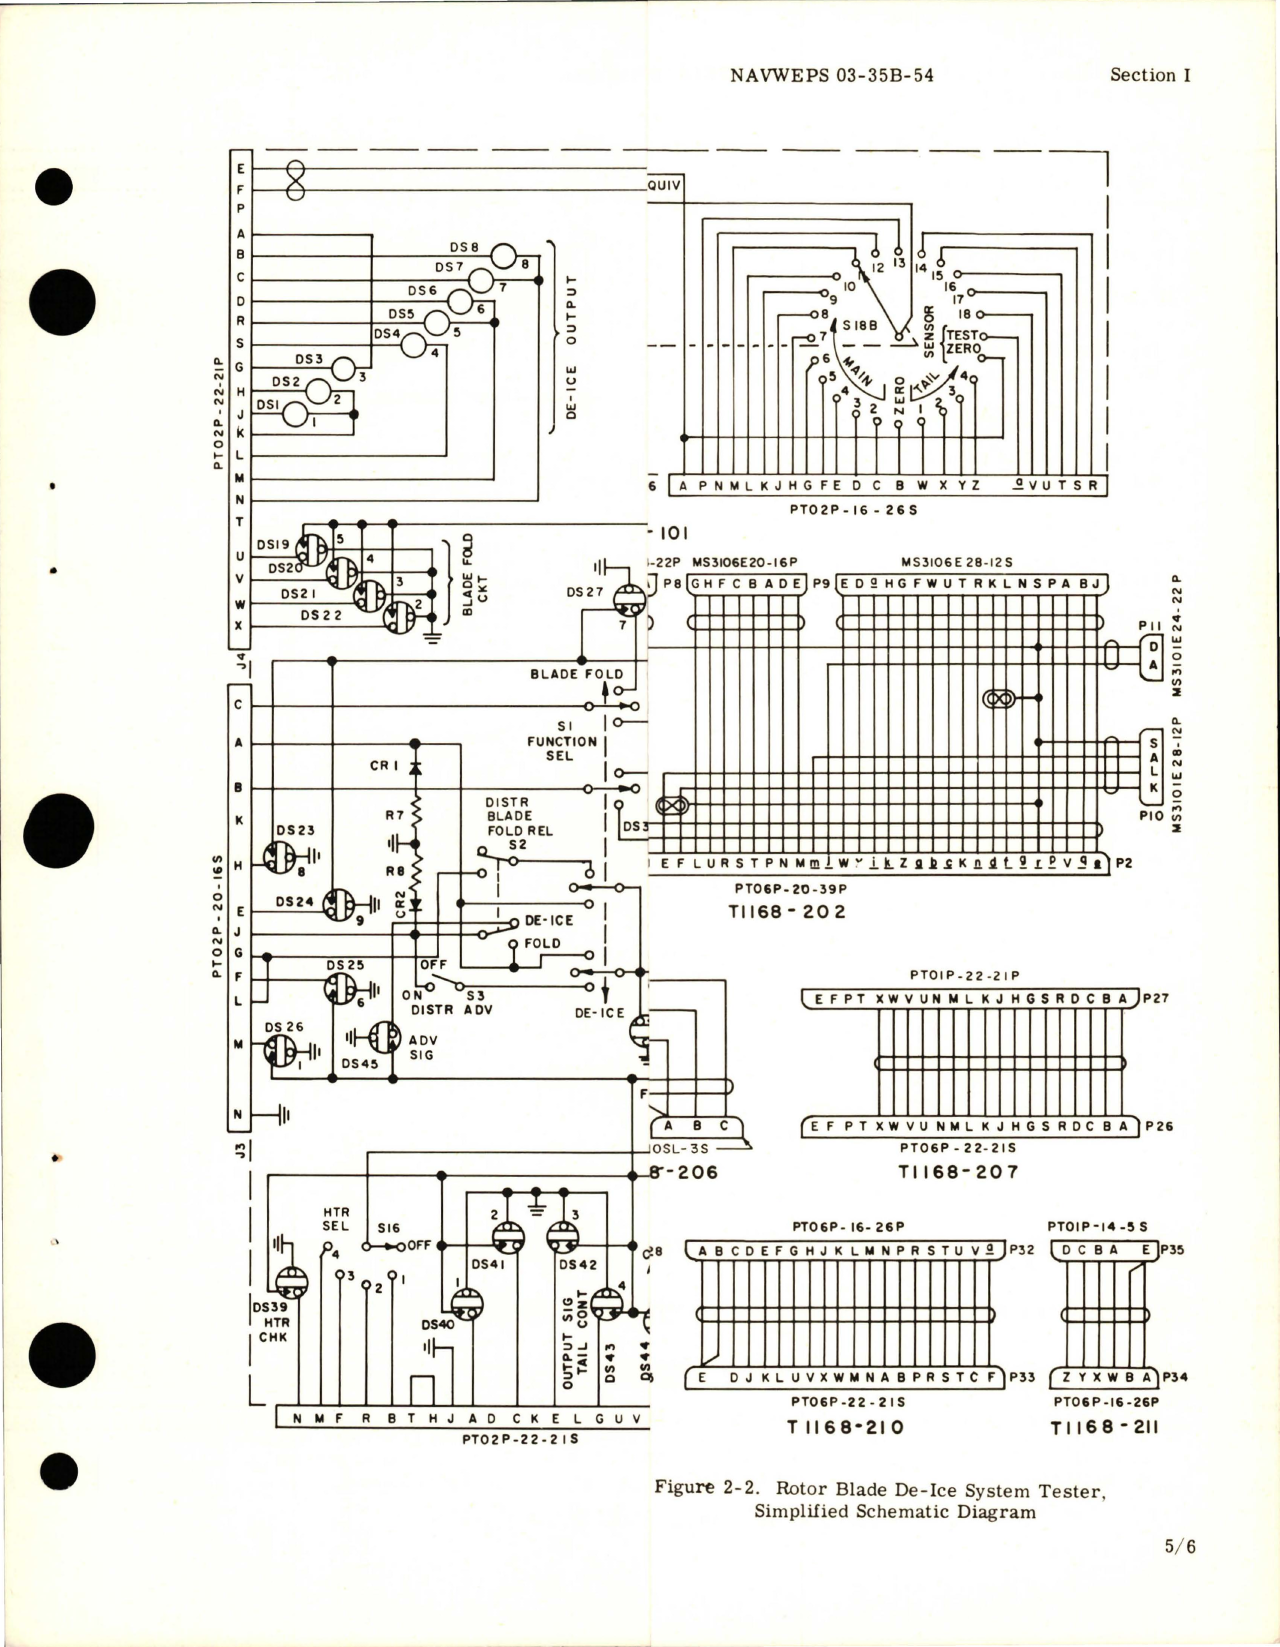 Sample page 7 from AirCorps Library document: Overhaul Instructions for Master De-Icing Controller - Part A628-1A